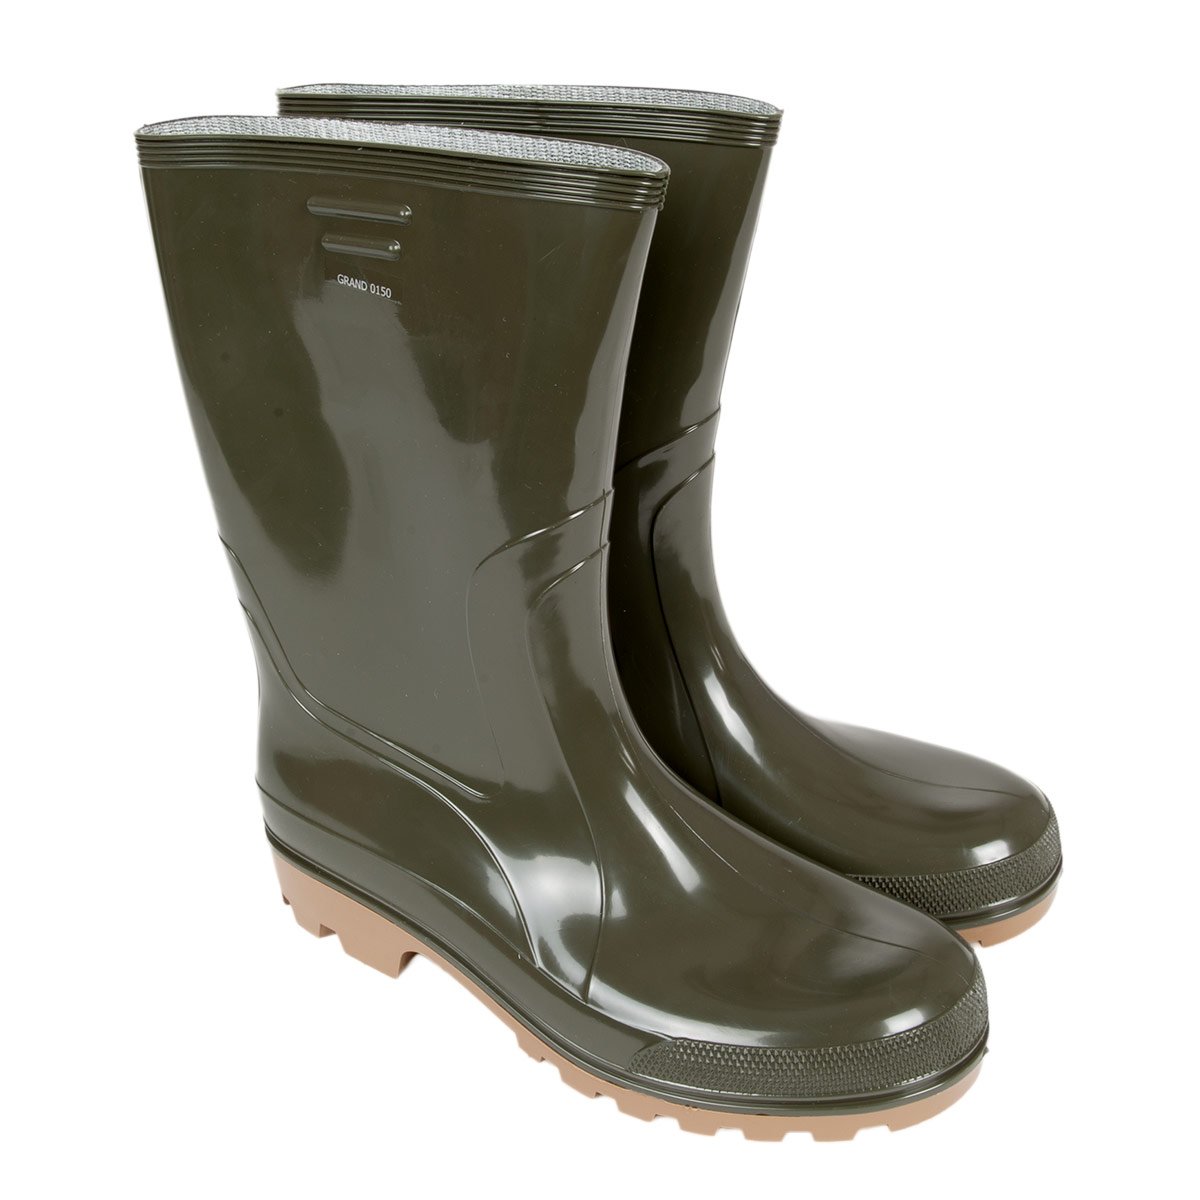 DEMAR Rubber boots for men with slipresistant sole and insole